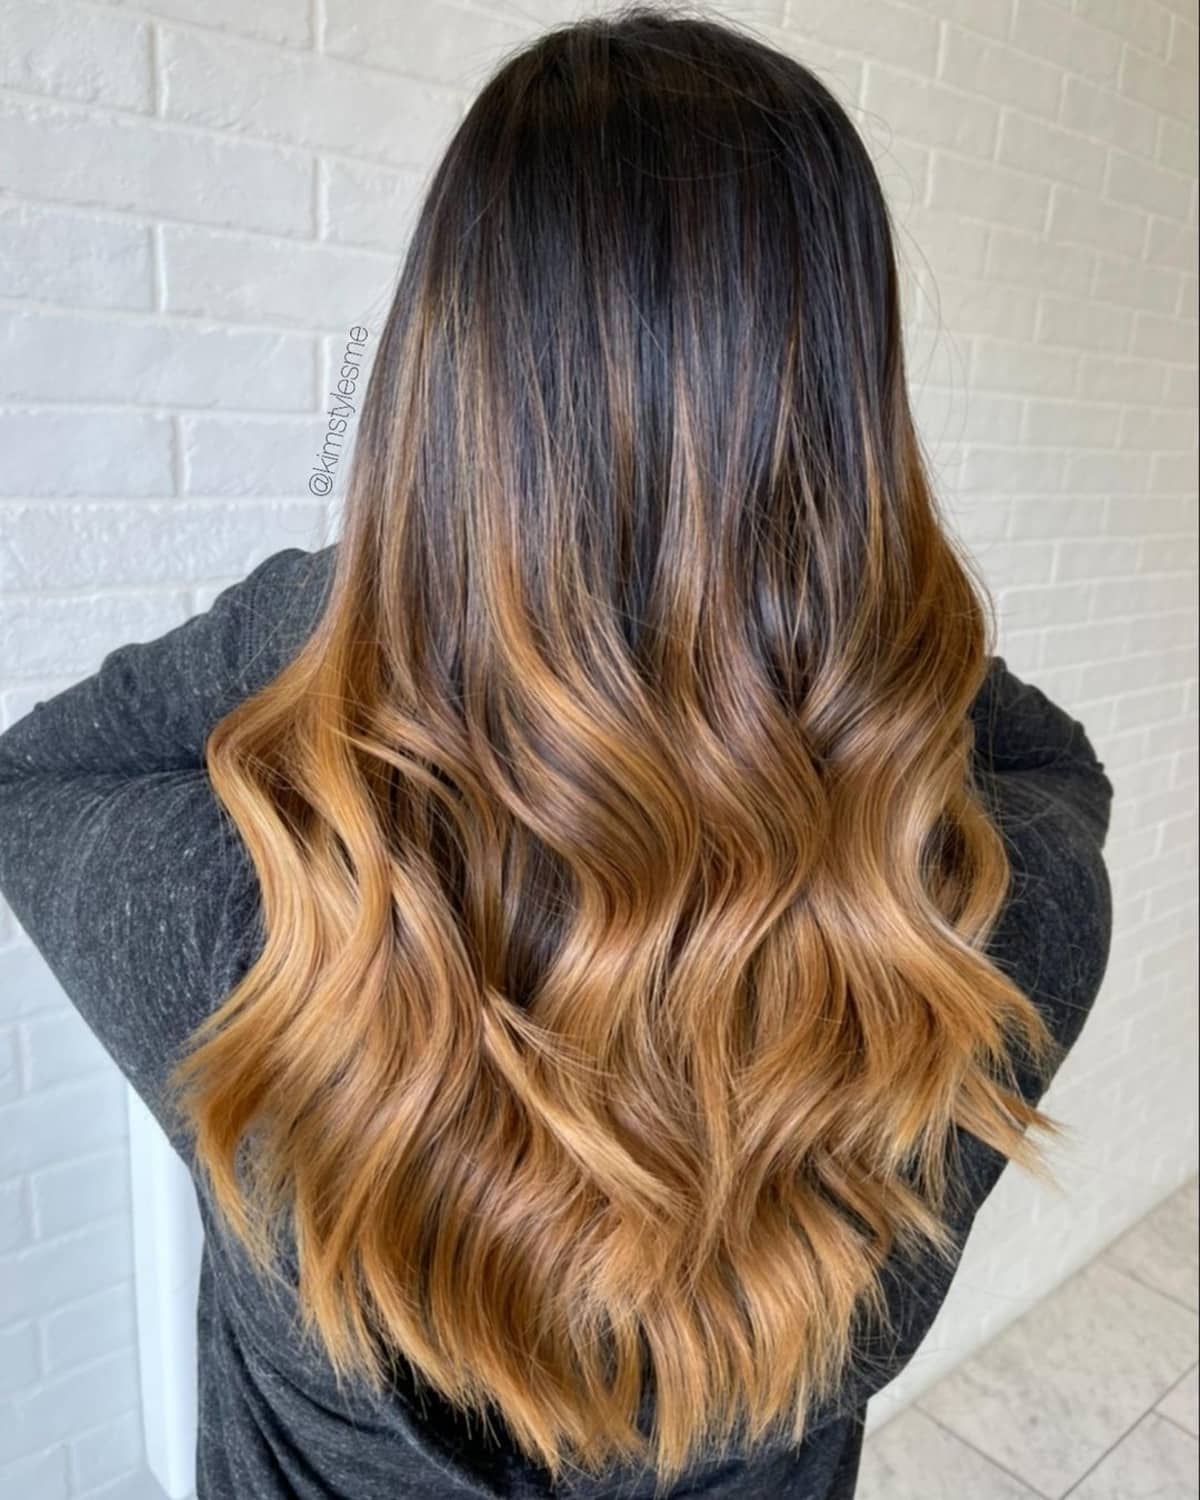 Espresso hair with caramel ombre